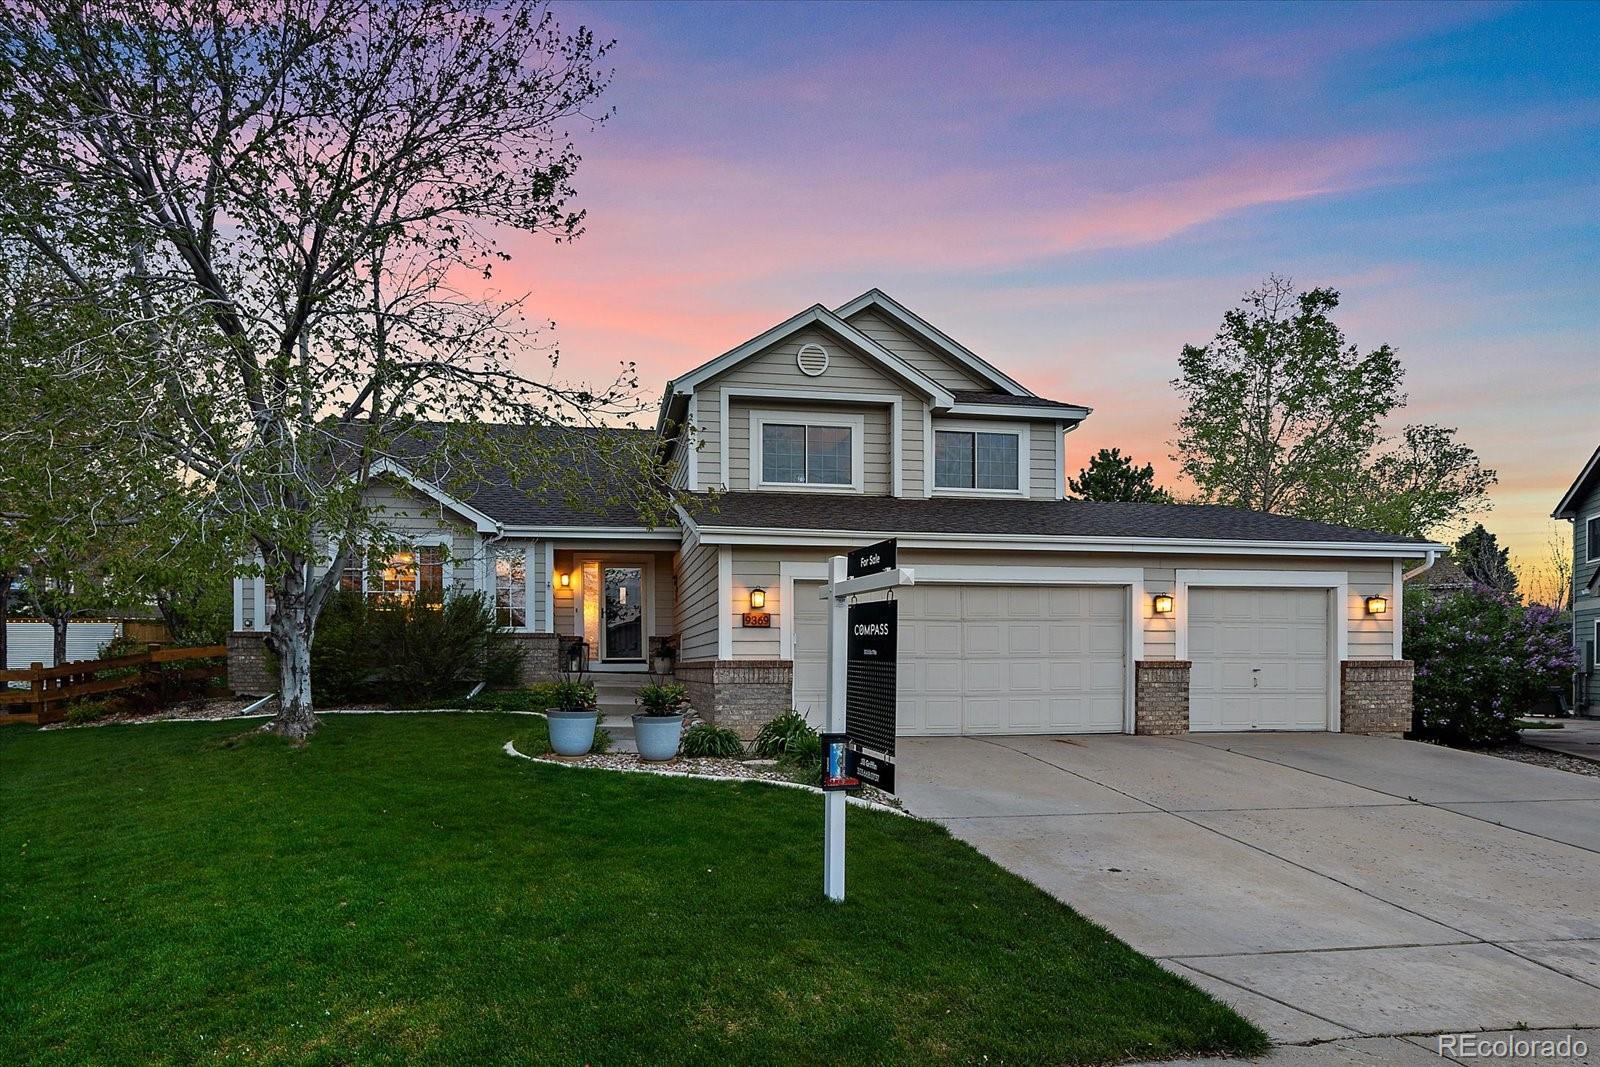 Photo one of 9369 Lark Sparrow Trl Highlands Ranch CO 80126 | MLS 9884136